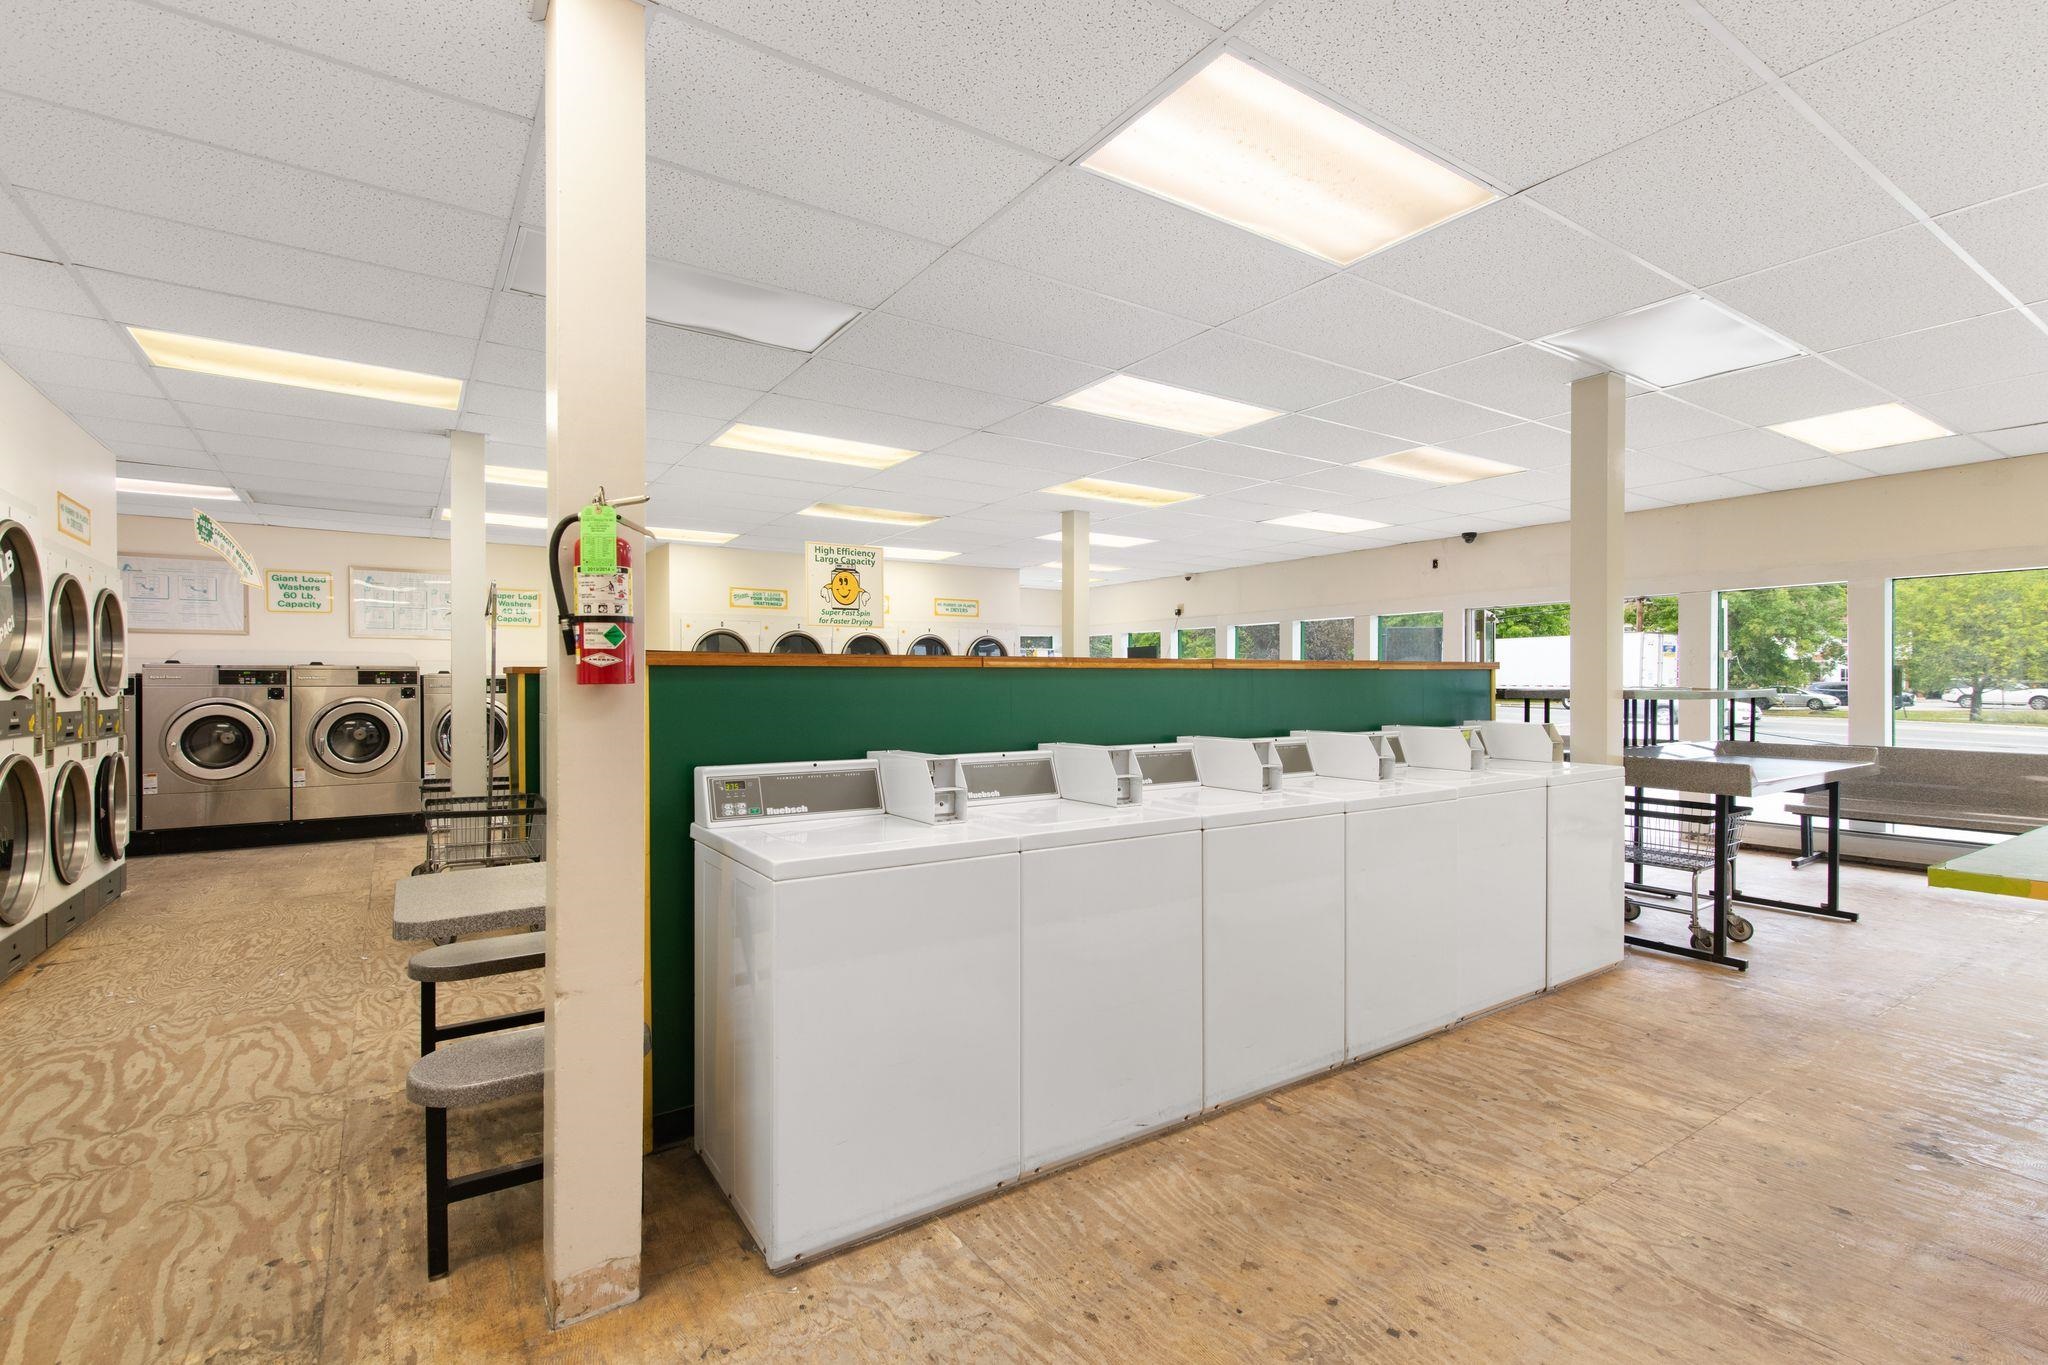 "Laundromat" building is approx. 2000 sq feet